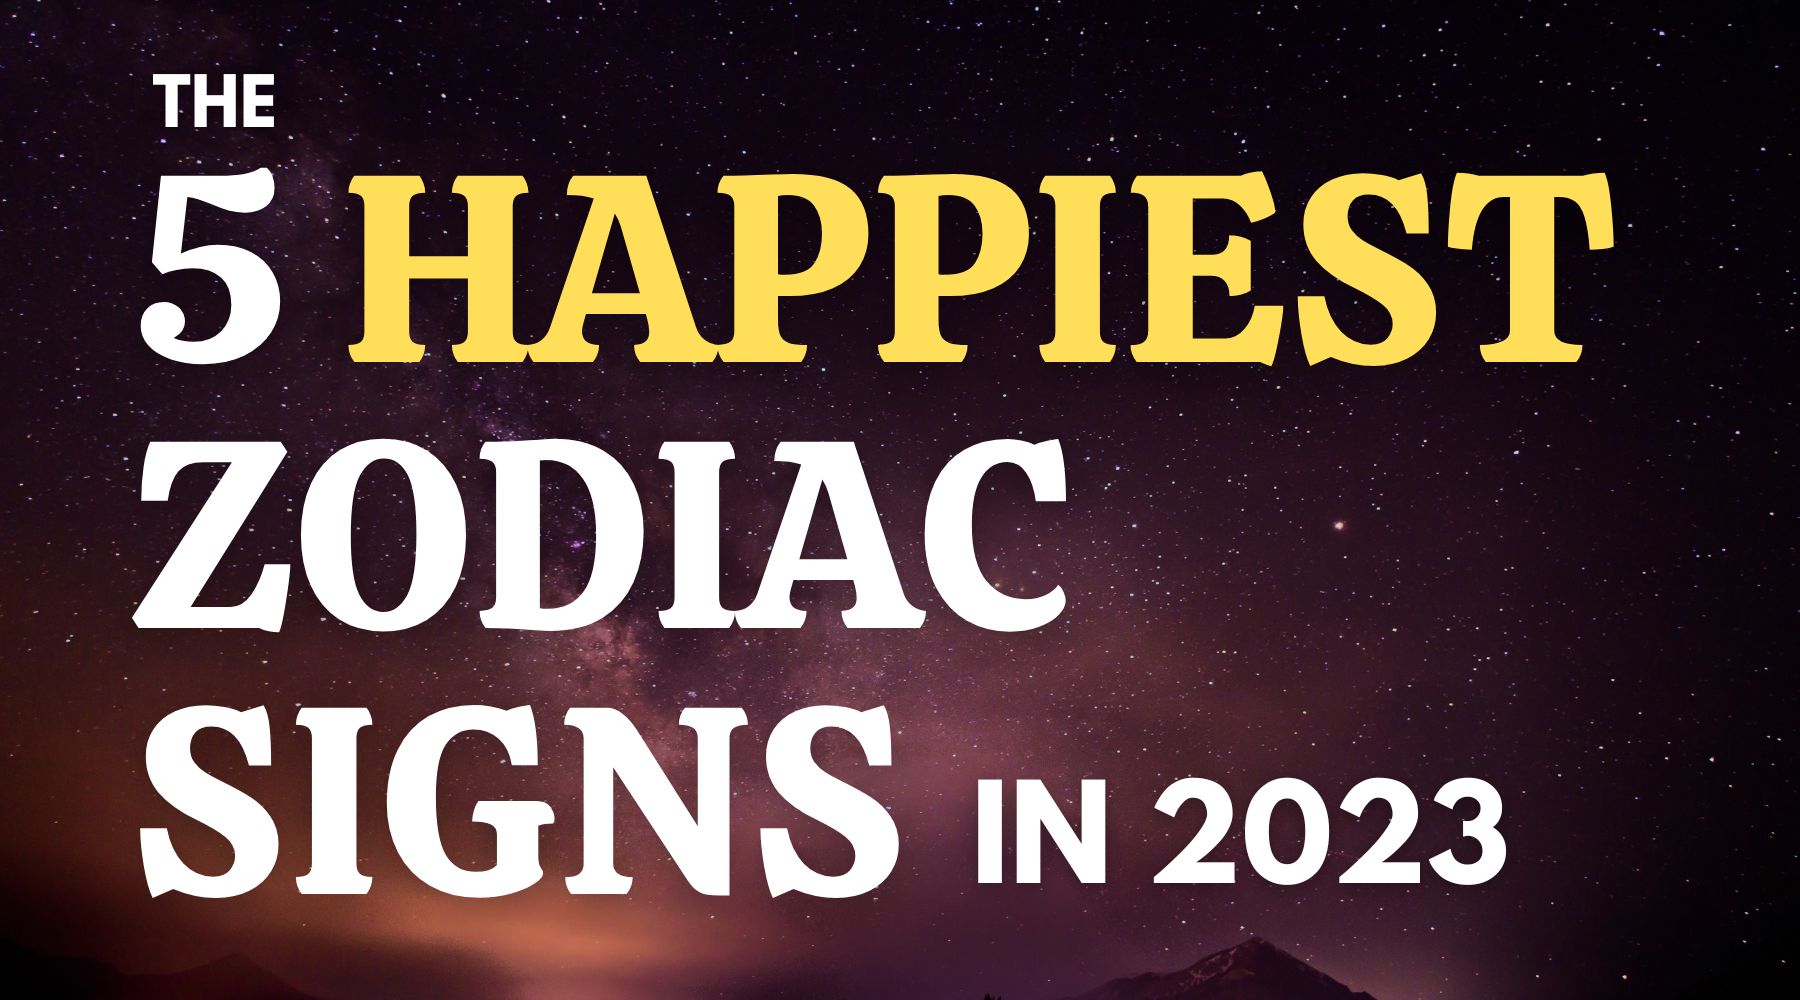 The 5 happiest zodiac signs in 2023-They will have a happy year!